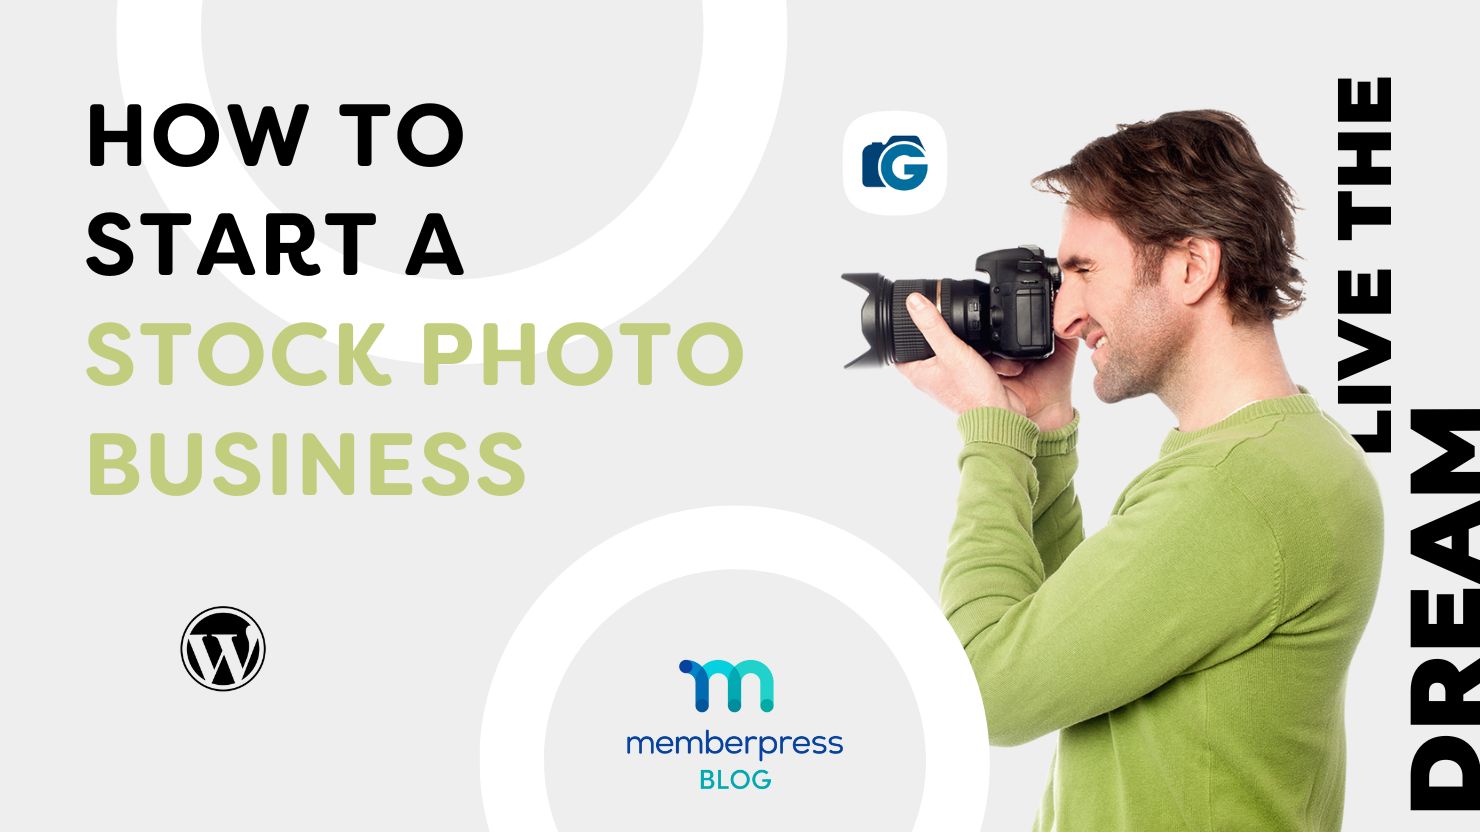 how to start a stock photo business with wordpress, memberpress, and photo gallery